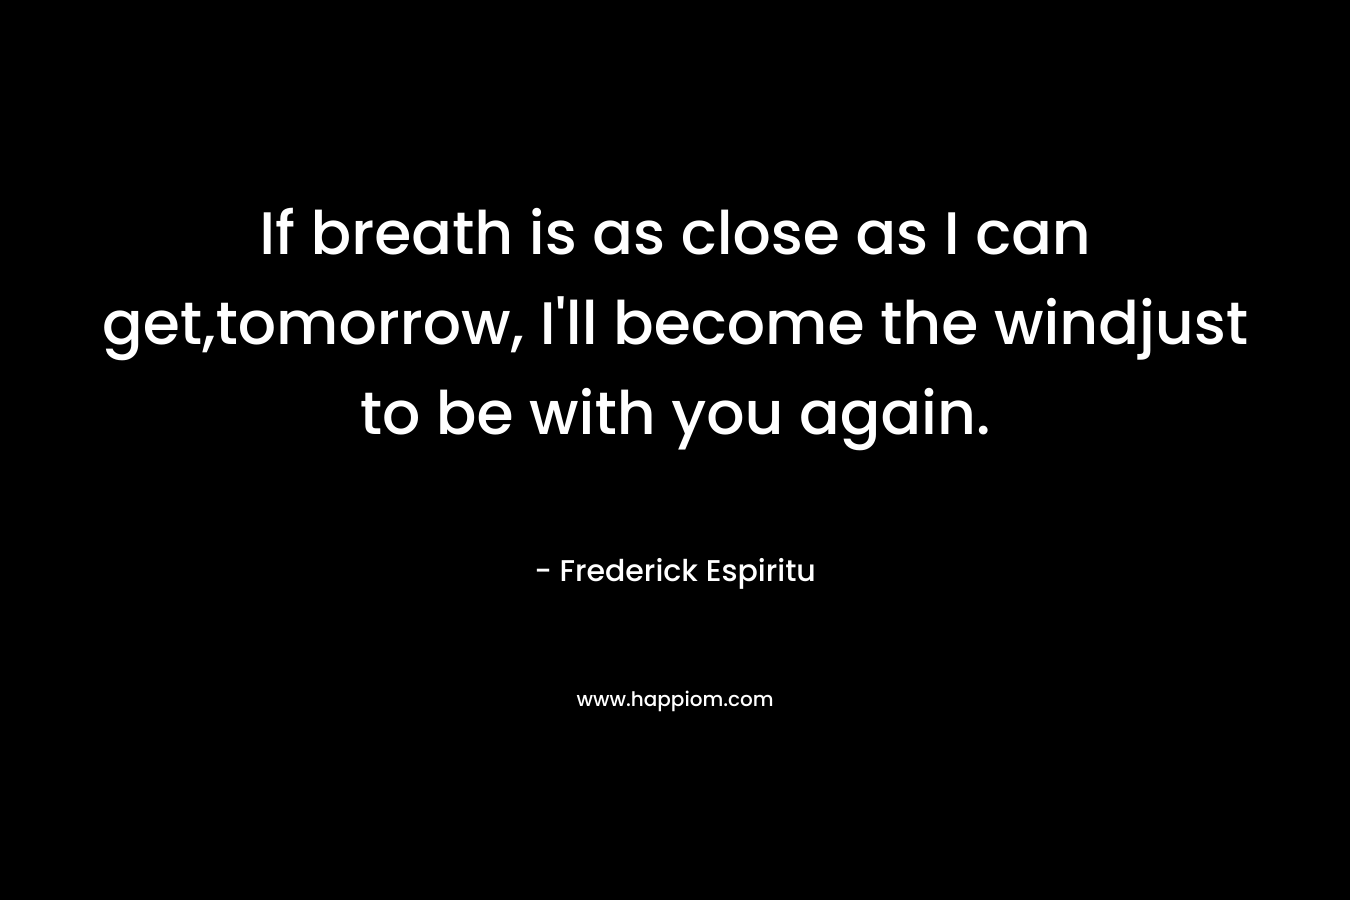 If breath is as close as I can get,tomorrow, I'll become the windjust to be with you again.